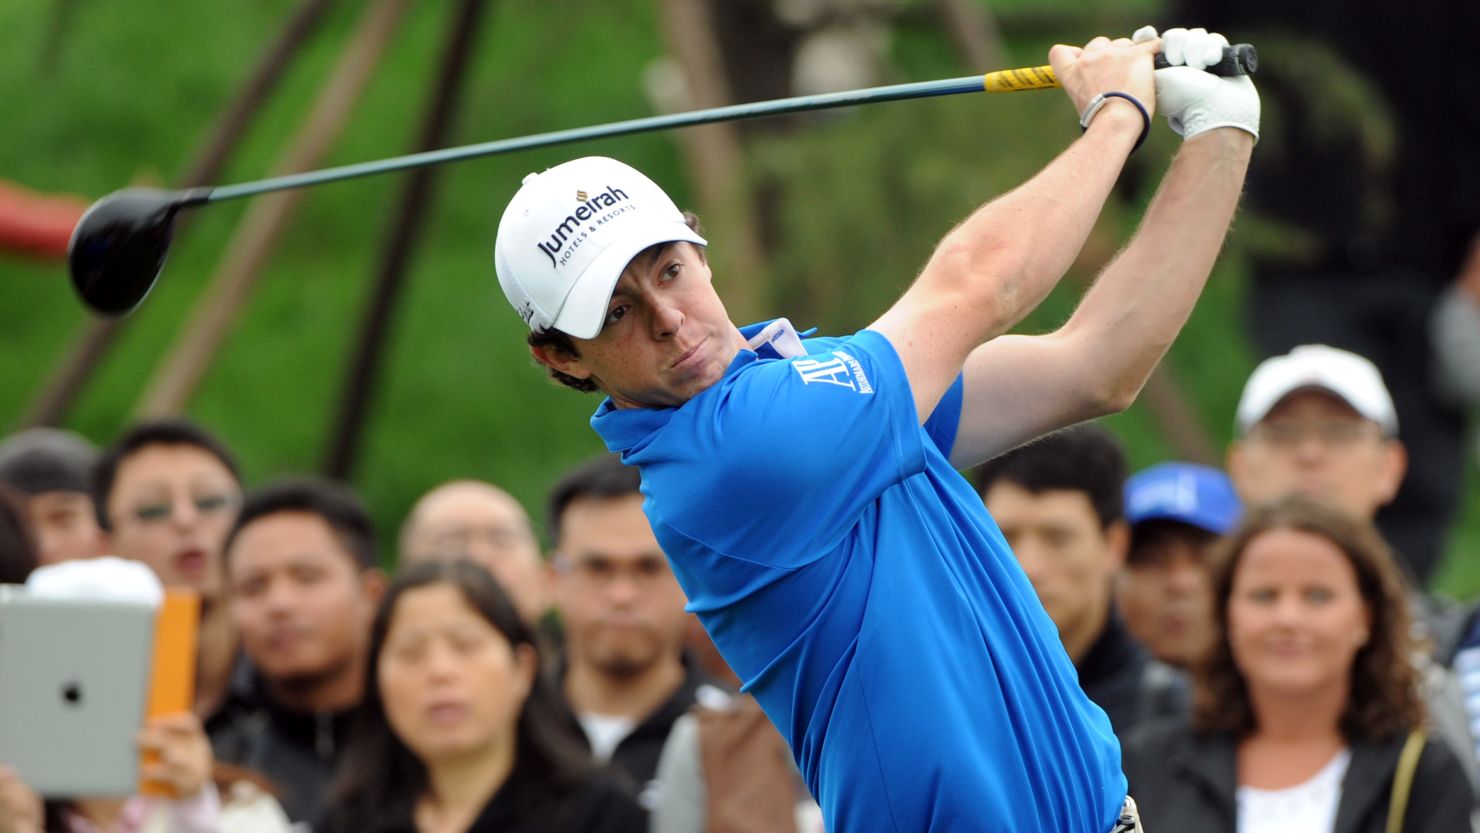 The reigning U.S. Open champion is still on course for the $2 million top prize at the Shanghai Masters